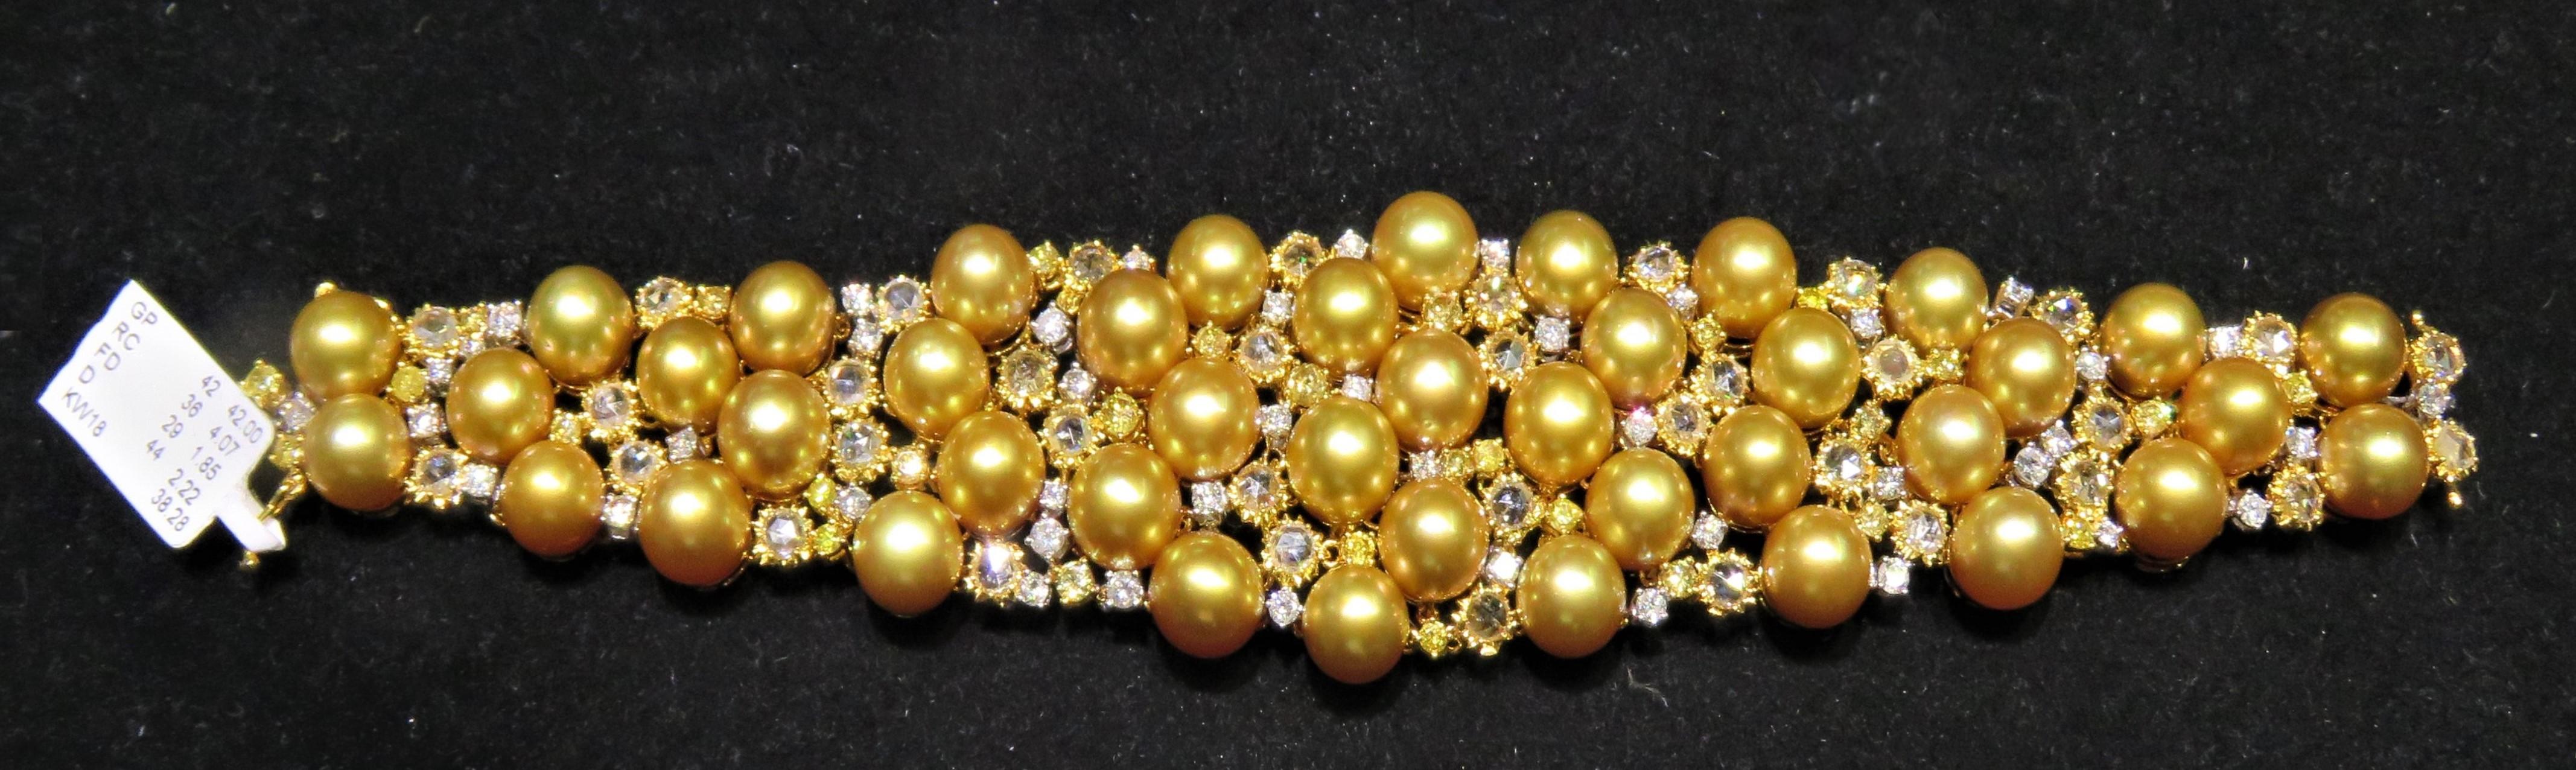 The Following Item we are offering is this Beautiful Rare Important 18KT Gold Fancy Large Golden Pearl and Fancy Rose Cut Yellow Diamond and White Diamond Bracelet. Bracelet is comprised of 42 Beautiful Magnificent High Luster Large AA-AAA GOLDEN